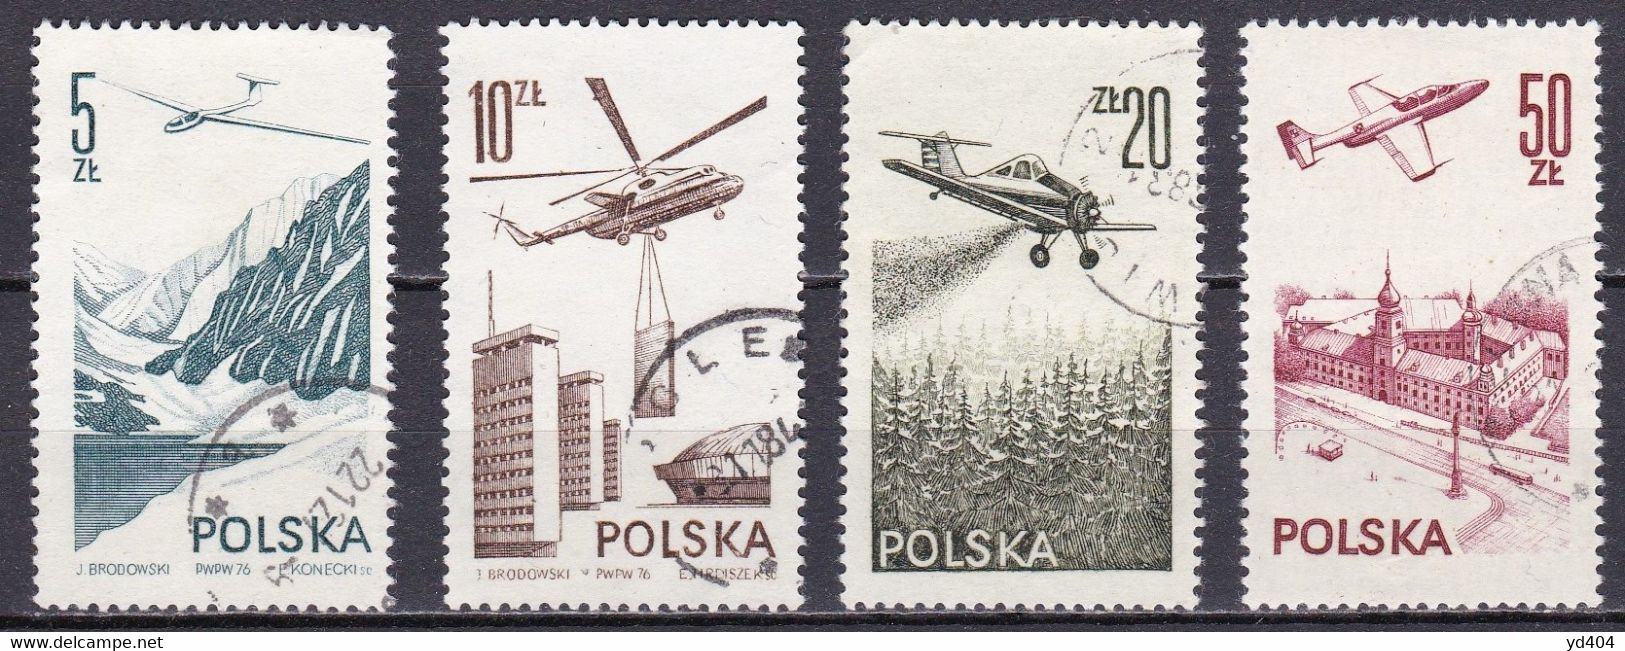 PL309 – POLAND – AIRMAIL – 1976-78 – CONTEMPORARY AVIATION - Y&T # 55/8 USED 3,30 € - Used Stamps